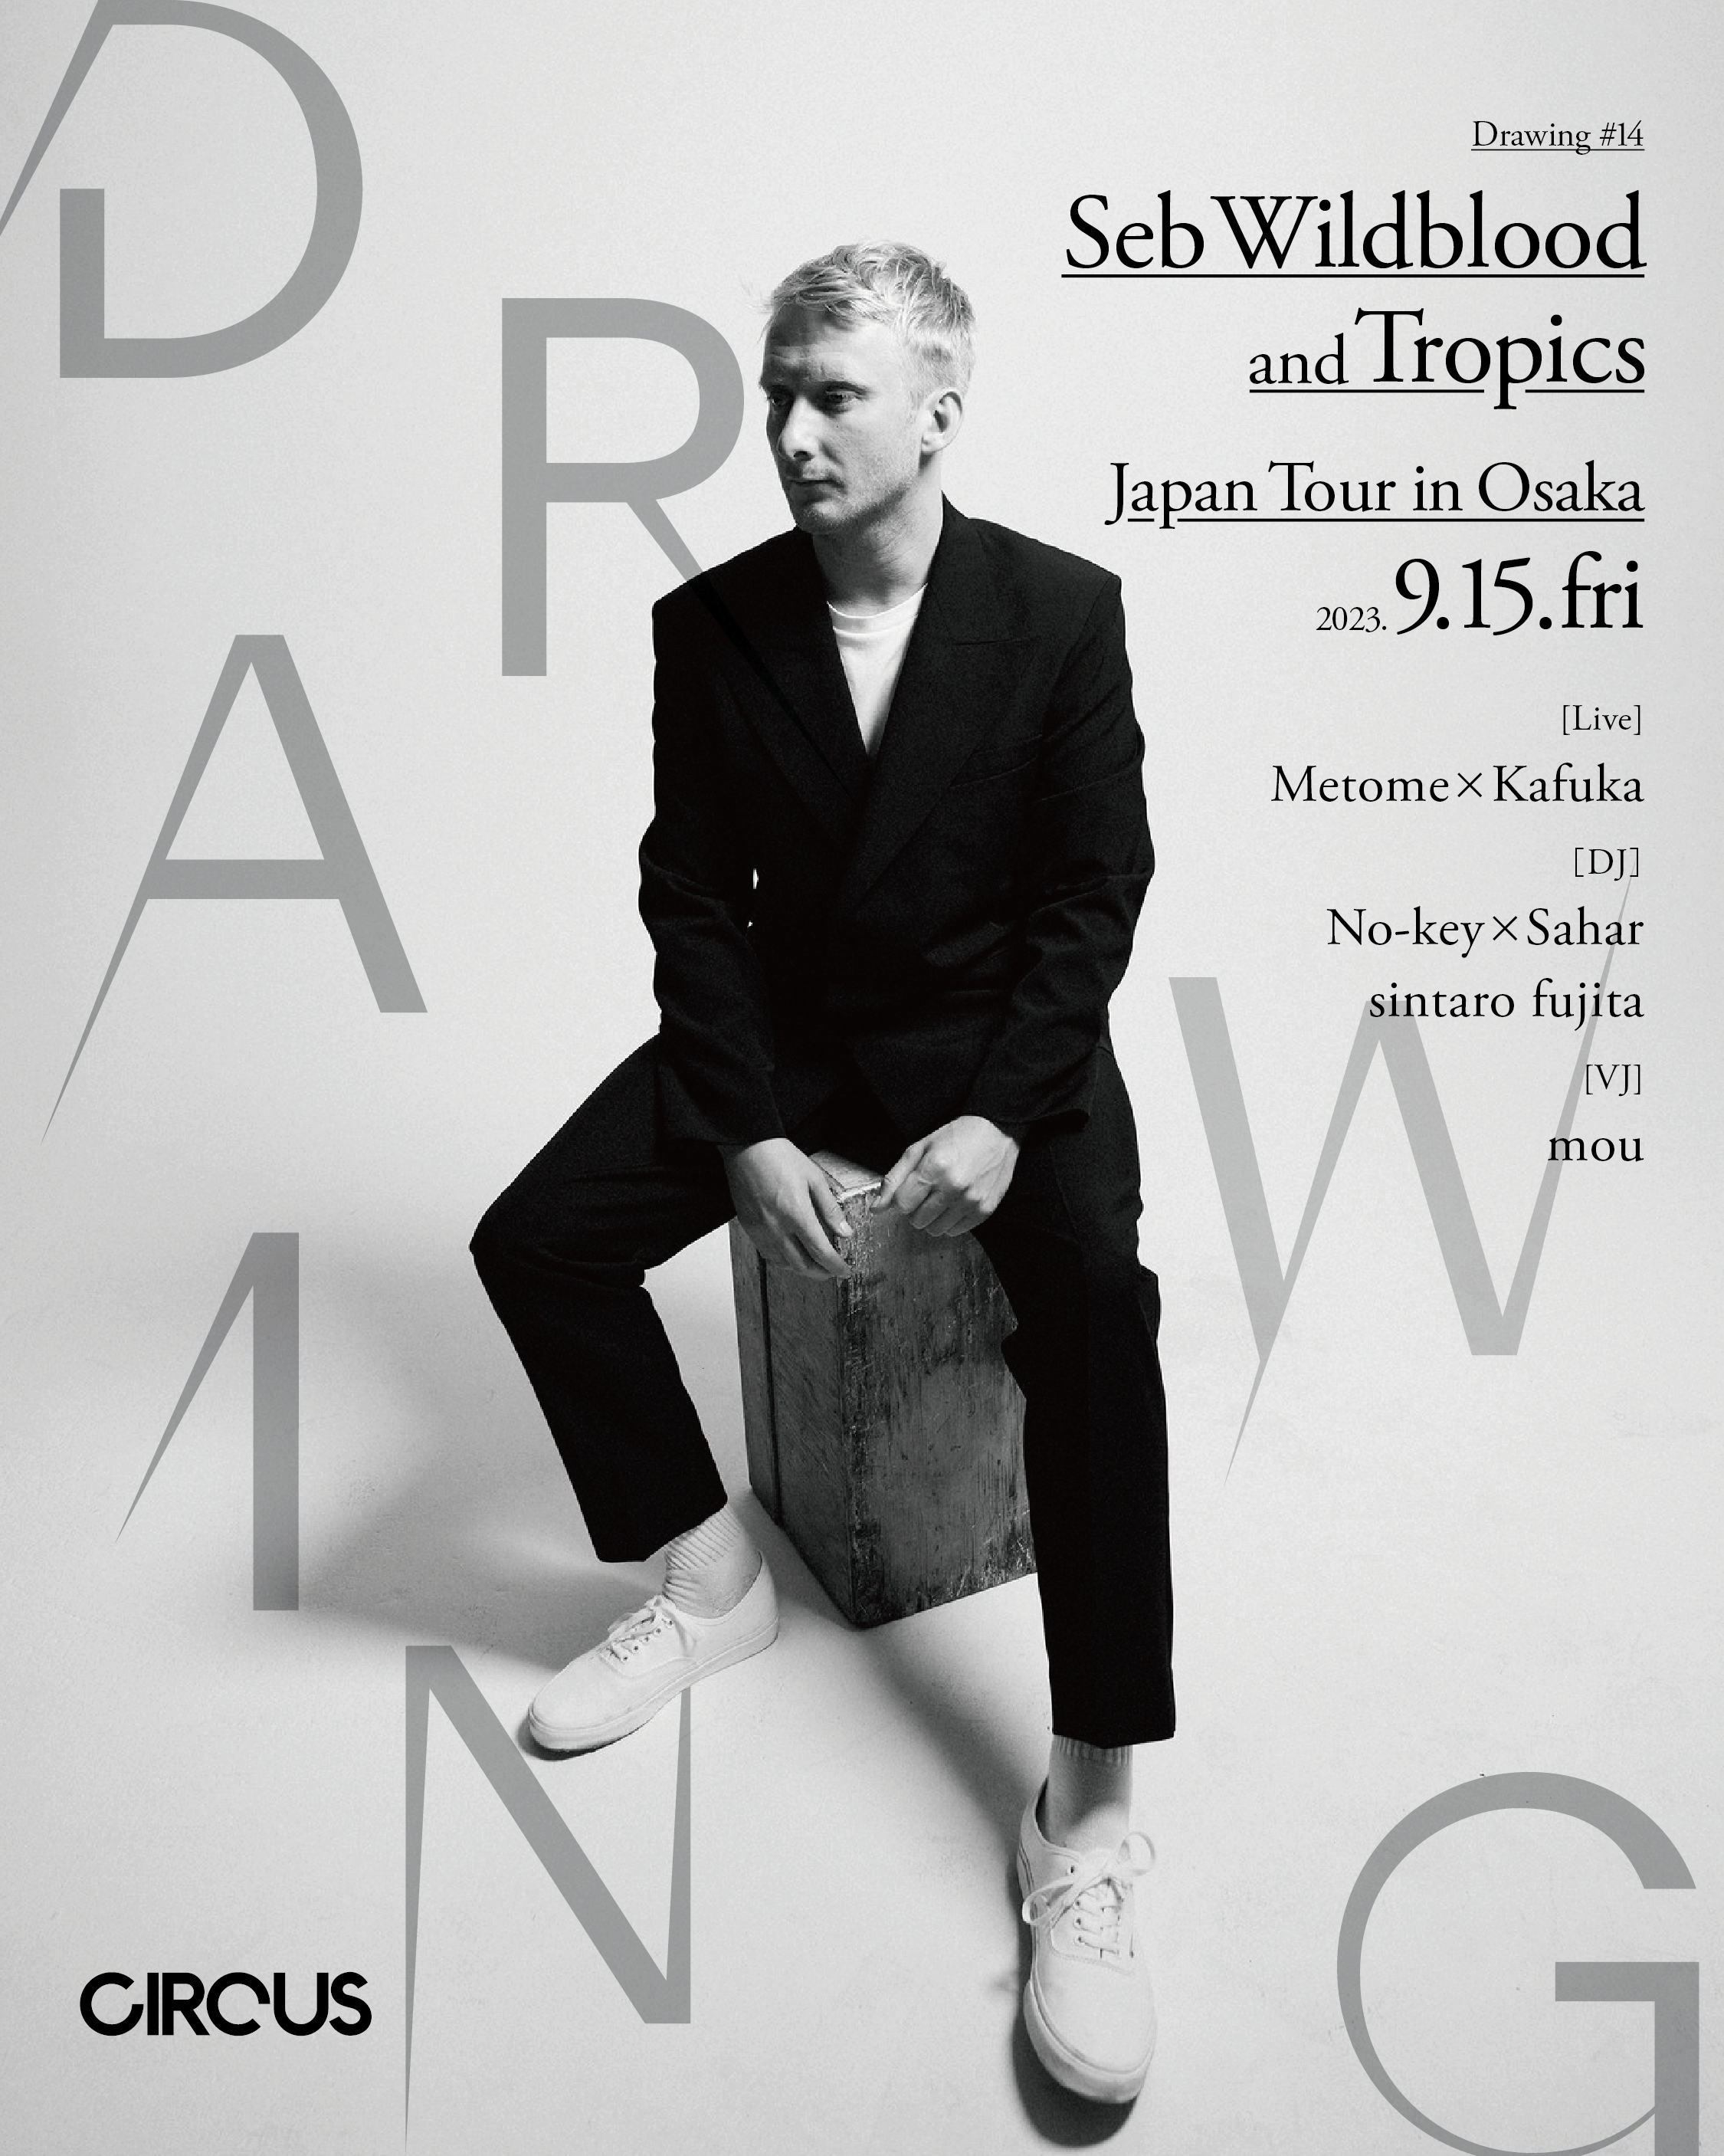 Seb Wildblood and Tropics Japan Tour in Osaka Supported by drawing - Página frontal